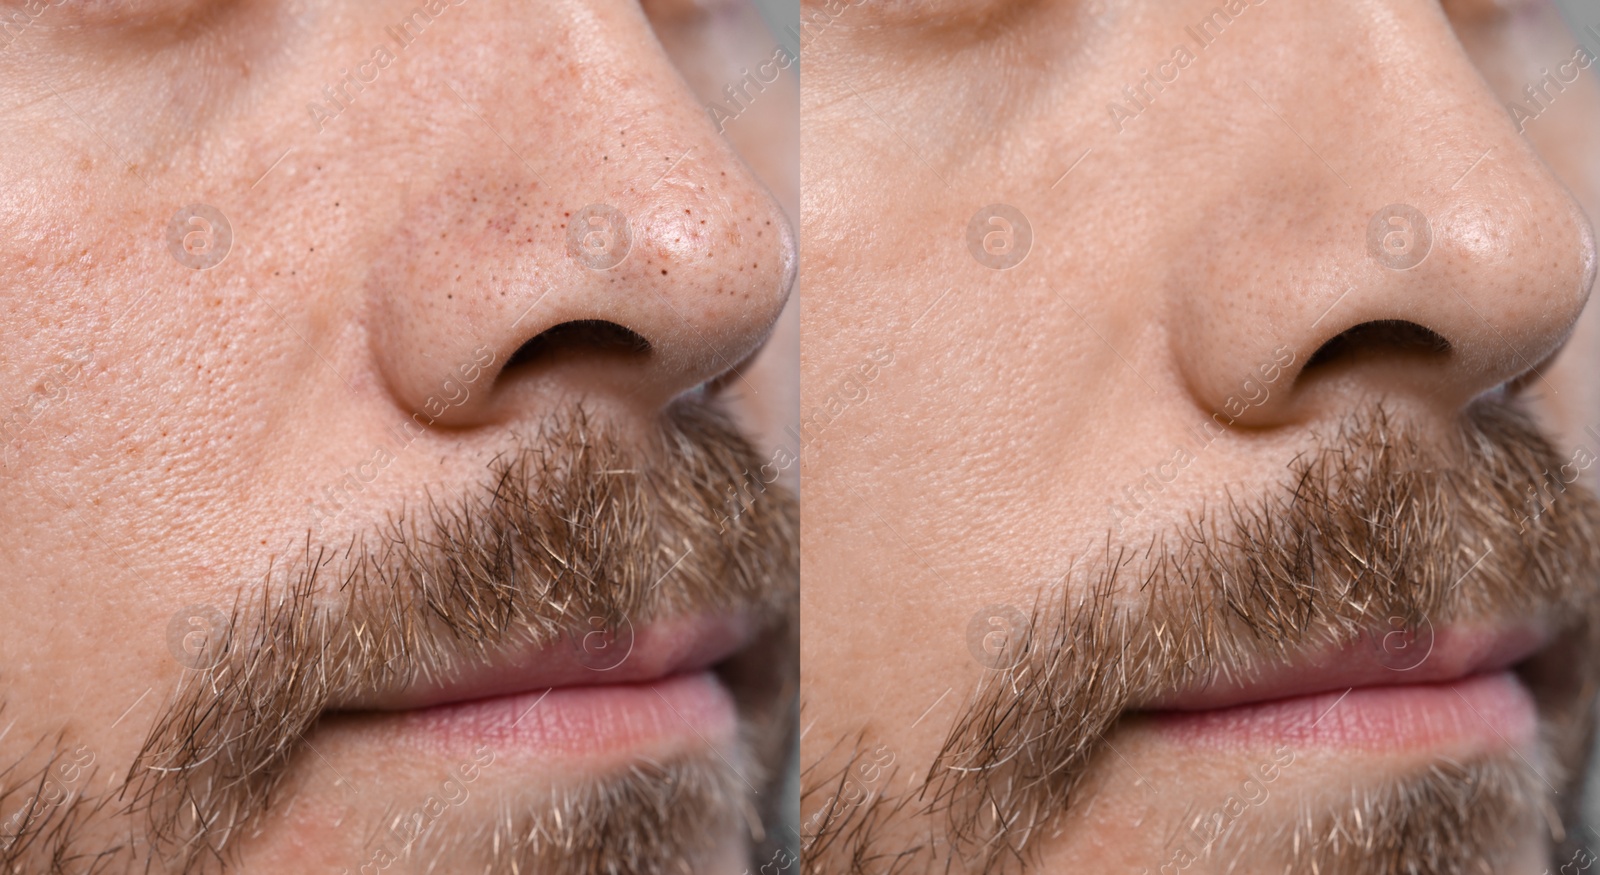 Image of Blackhead treatment, before and after. Collage with photos of man, closeup view